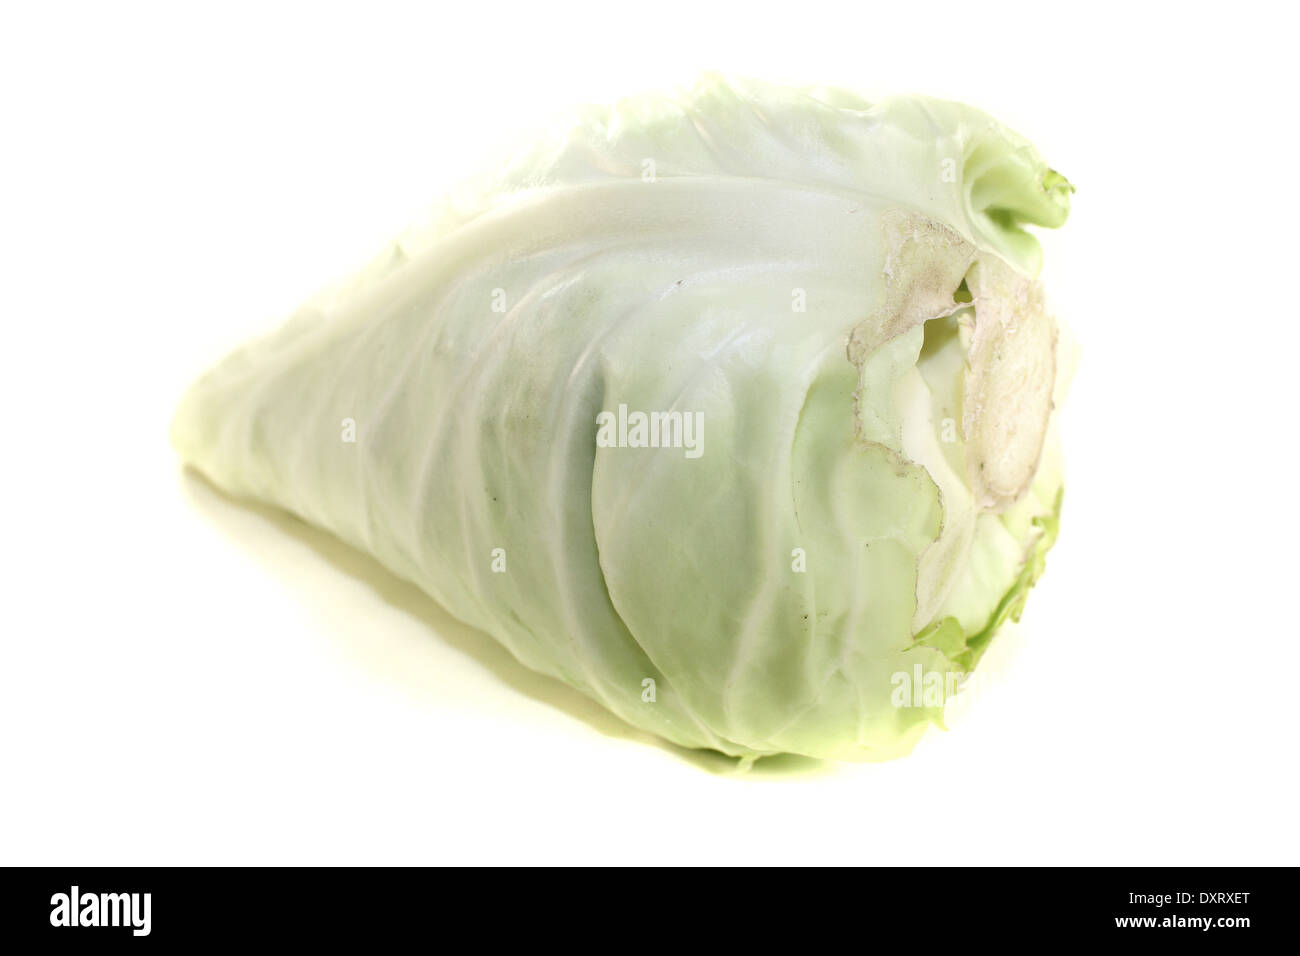 fresh green pointed cabbage on a light background Stock Photo